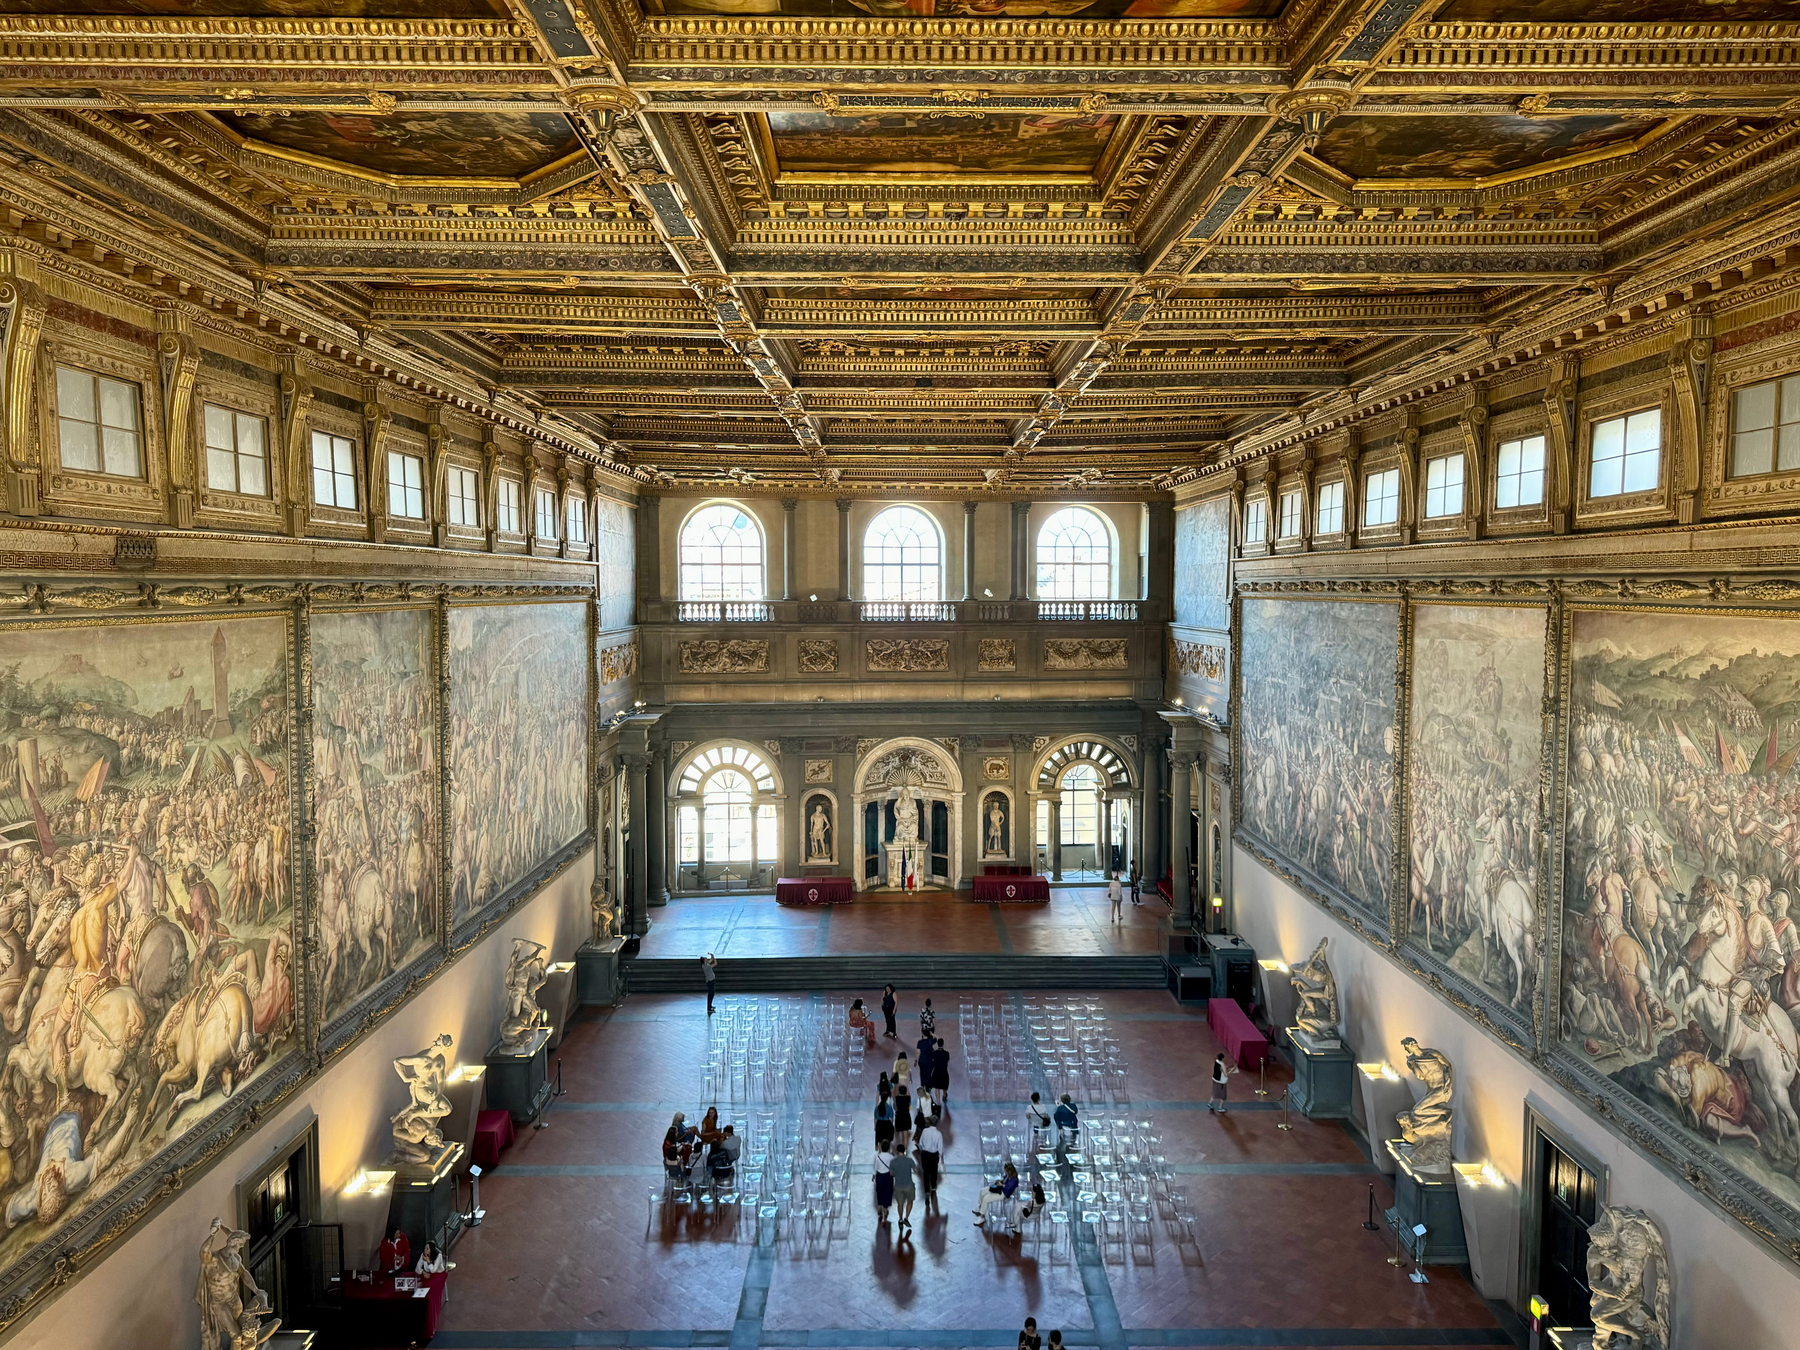 A grand hall with an ornate, gilded ceiling and large, detailed frescoes depicting historical battle scenes on the walls. Statues line the perimeter of the hall below the frescoes. The hall features tall arched windows and a few visitors walking. 